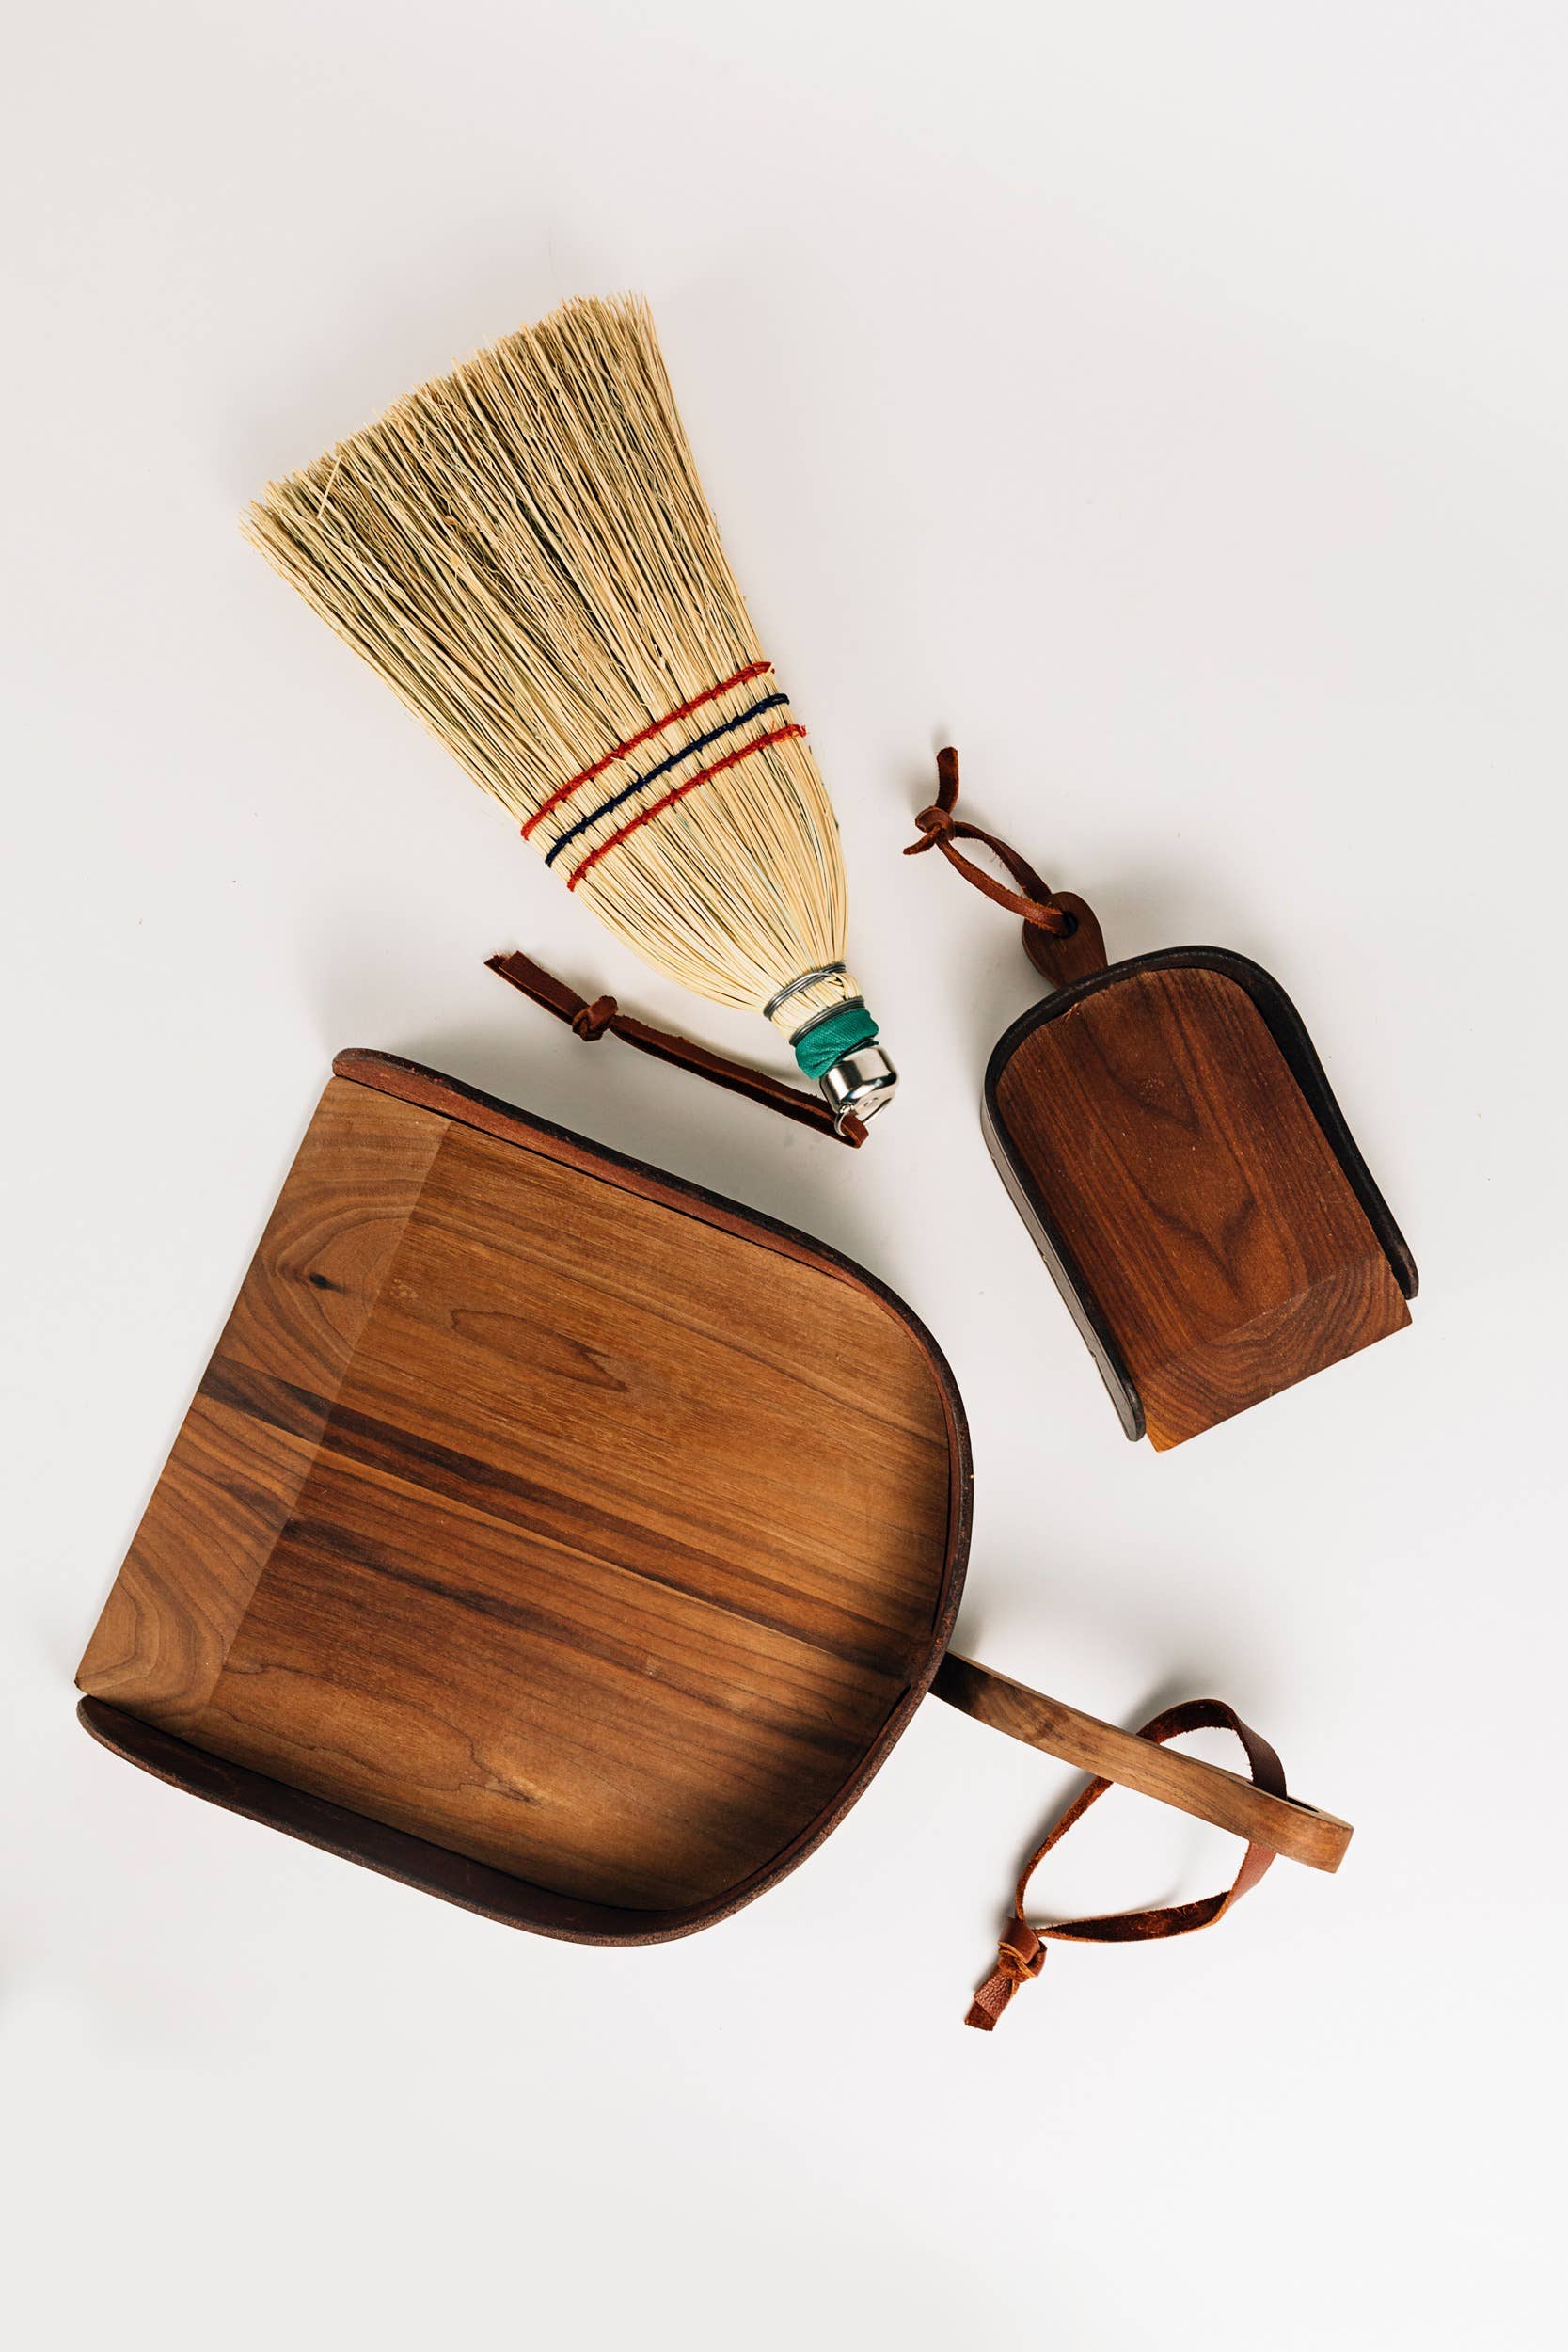 The Wood and Leather Dustpan